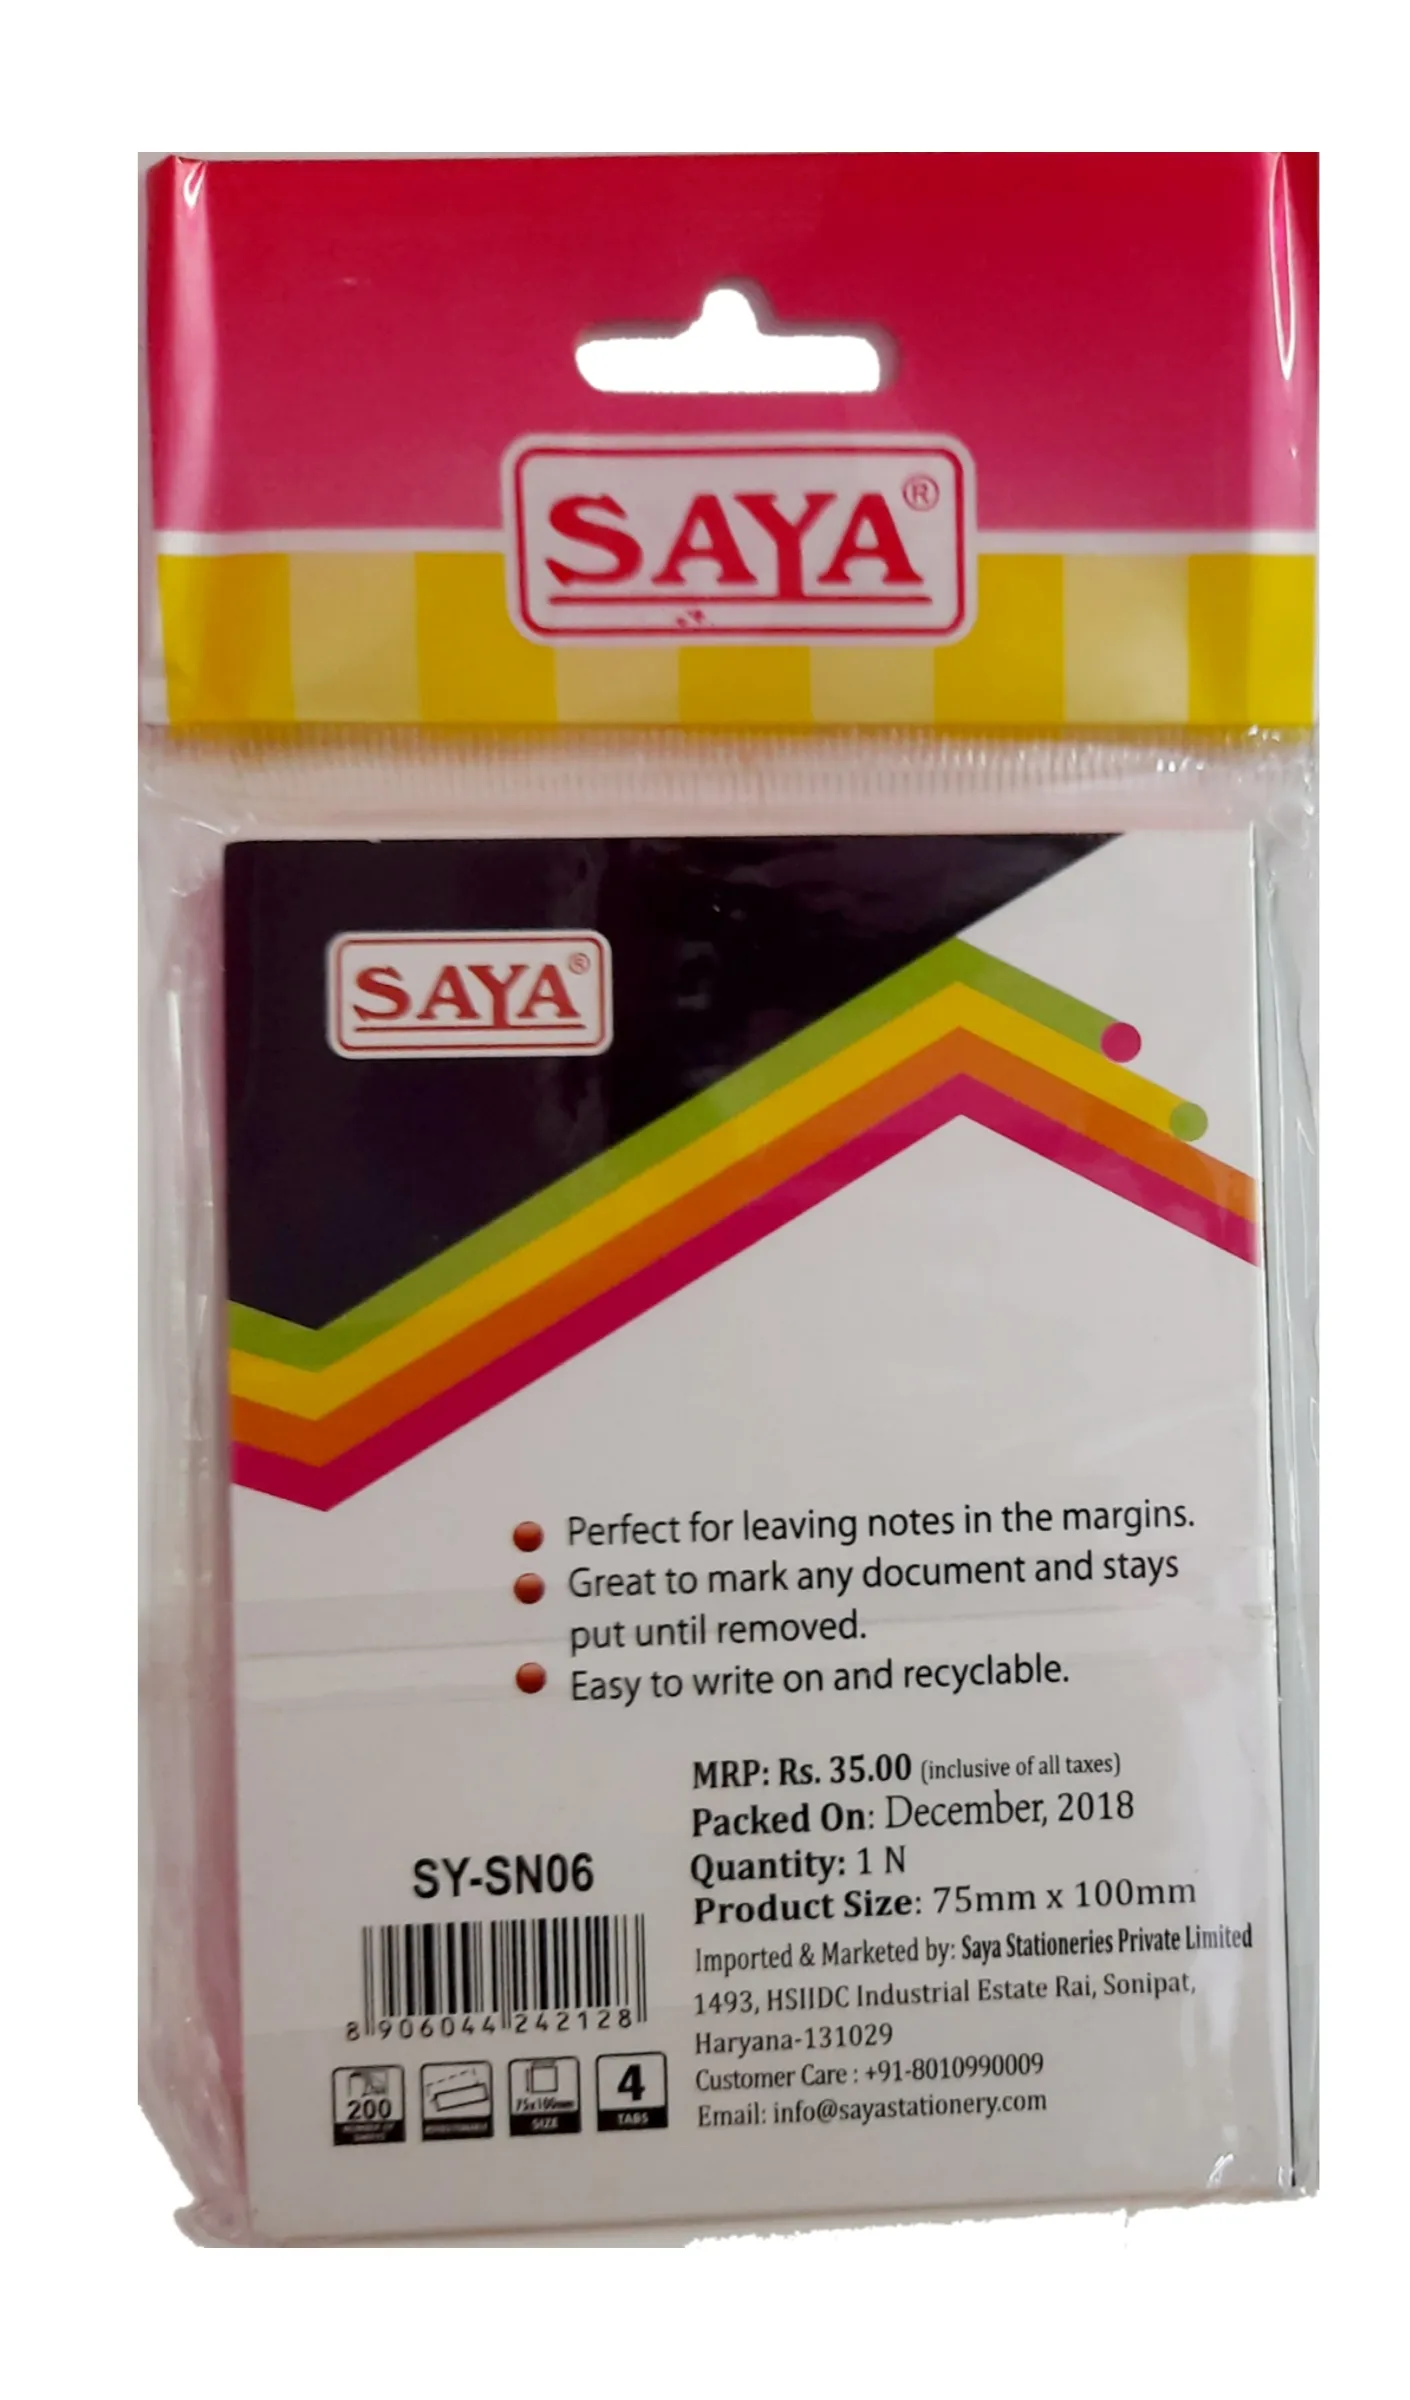 Saya Stick-eee Note Pads, 200 Sheets ,75X75mm, 4 Tabs, Pack of 1